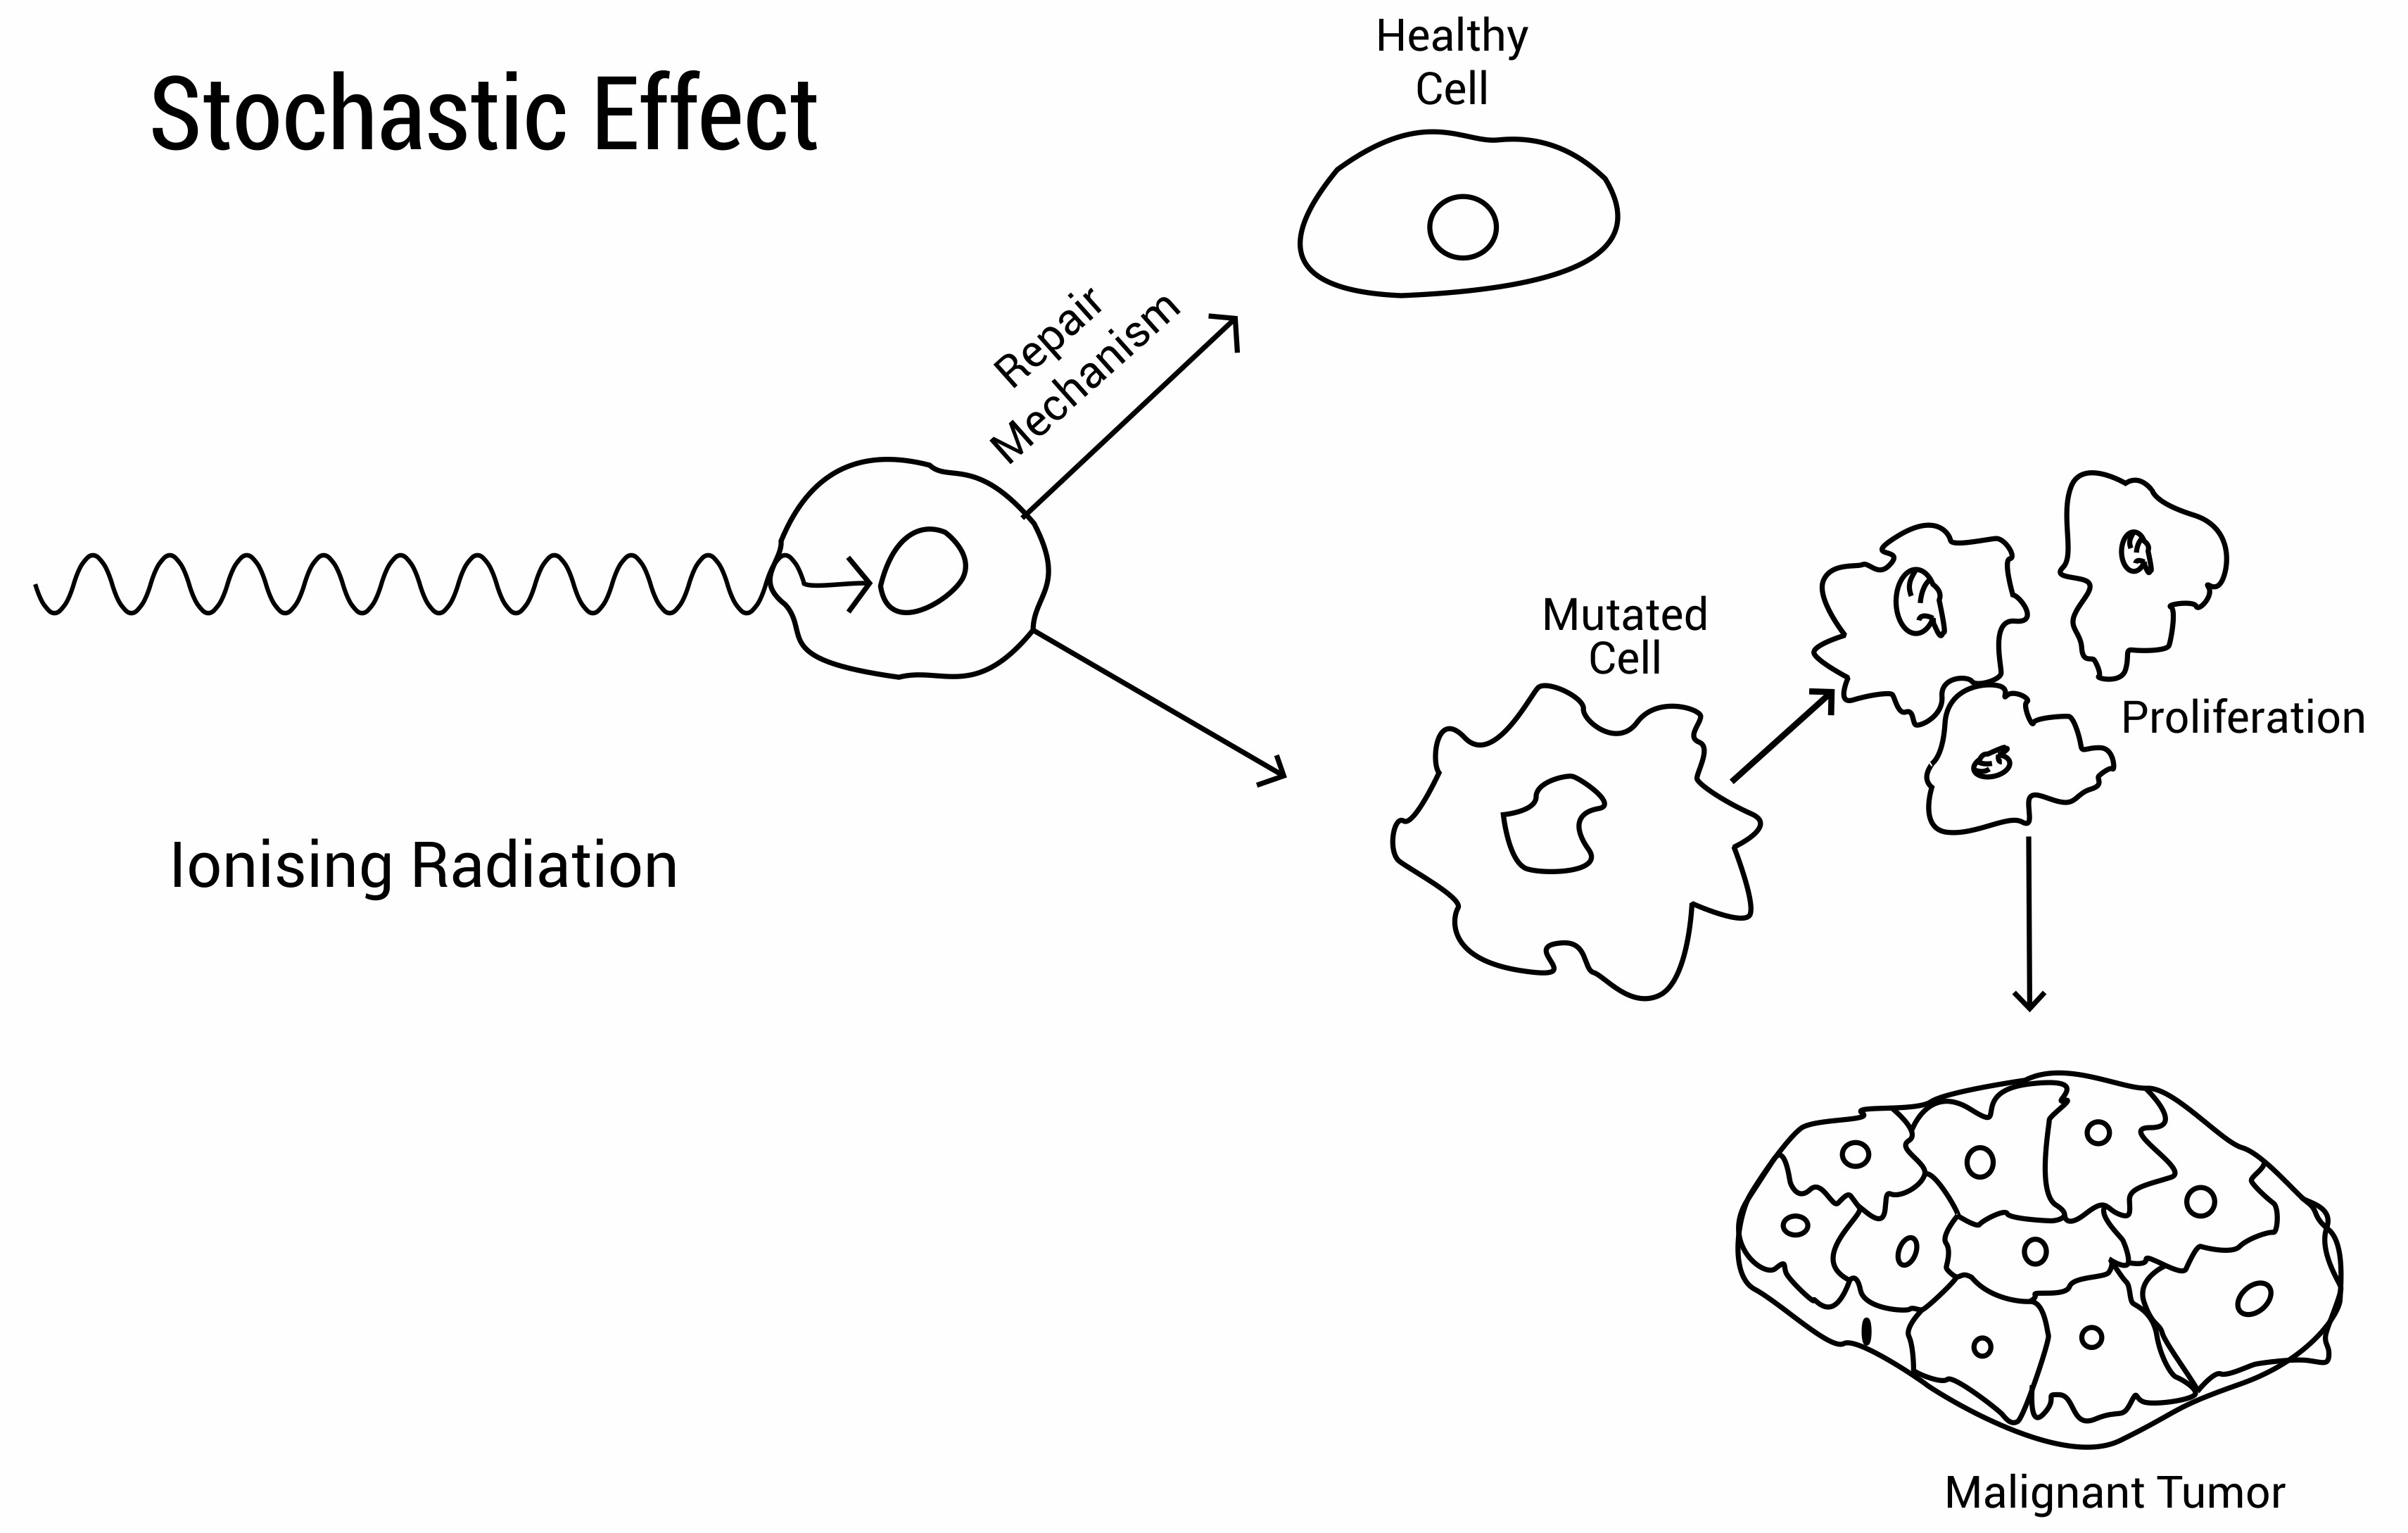 Stochastic Effect